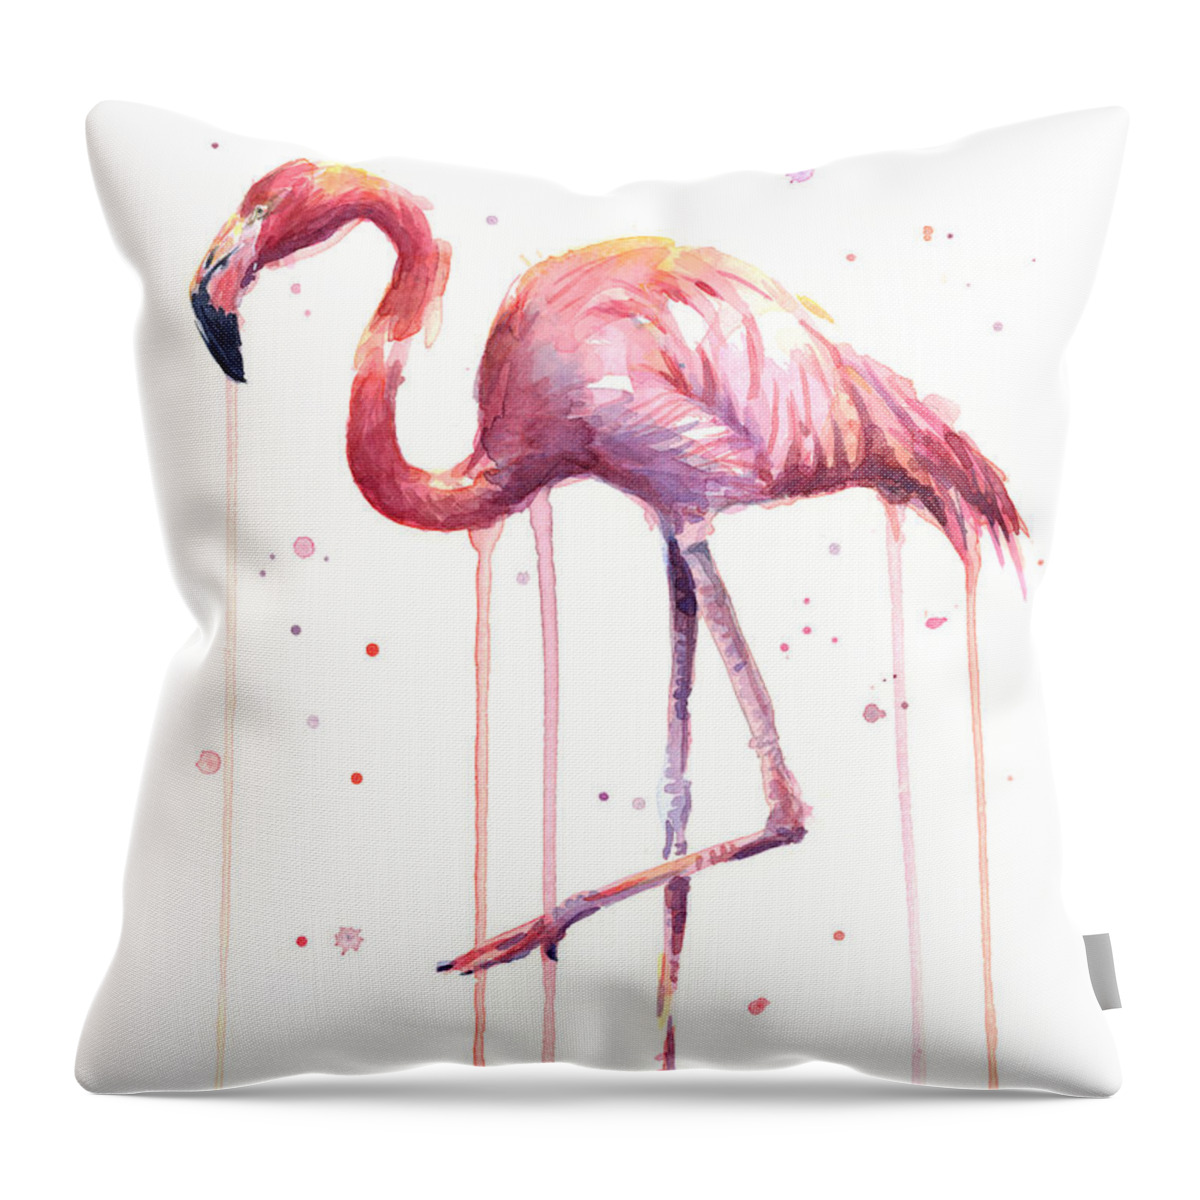 Watercolor Flamingo Throw Pillow featuring the painting Pink Watercolor Flamingo by Olga Shvartsur